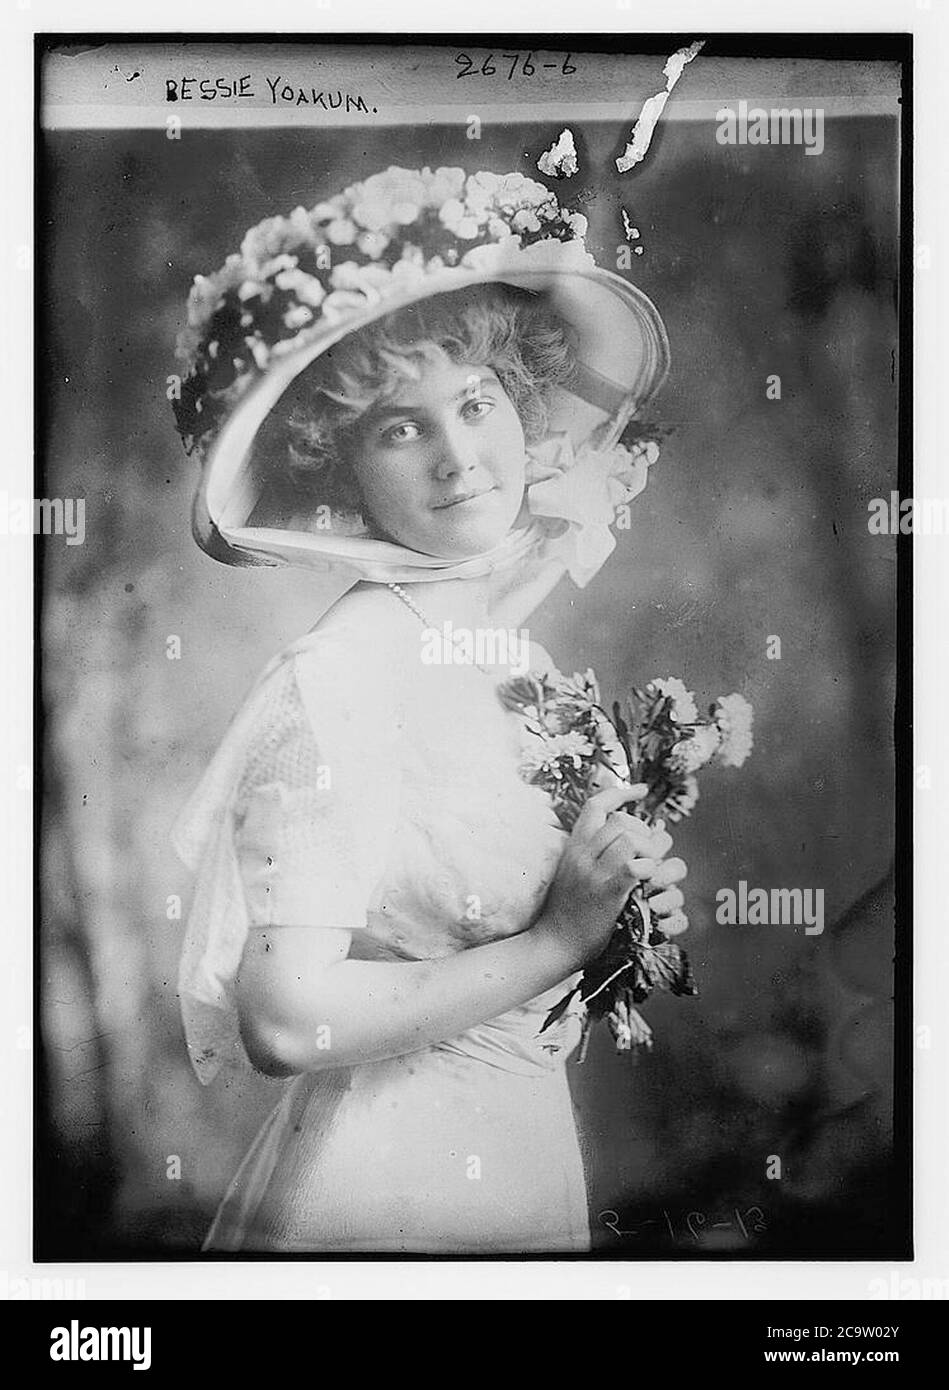 Bessie White High Resolution Stock Photography and Images - Alamy